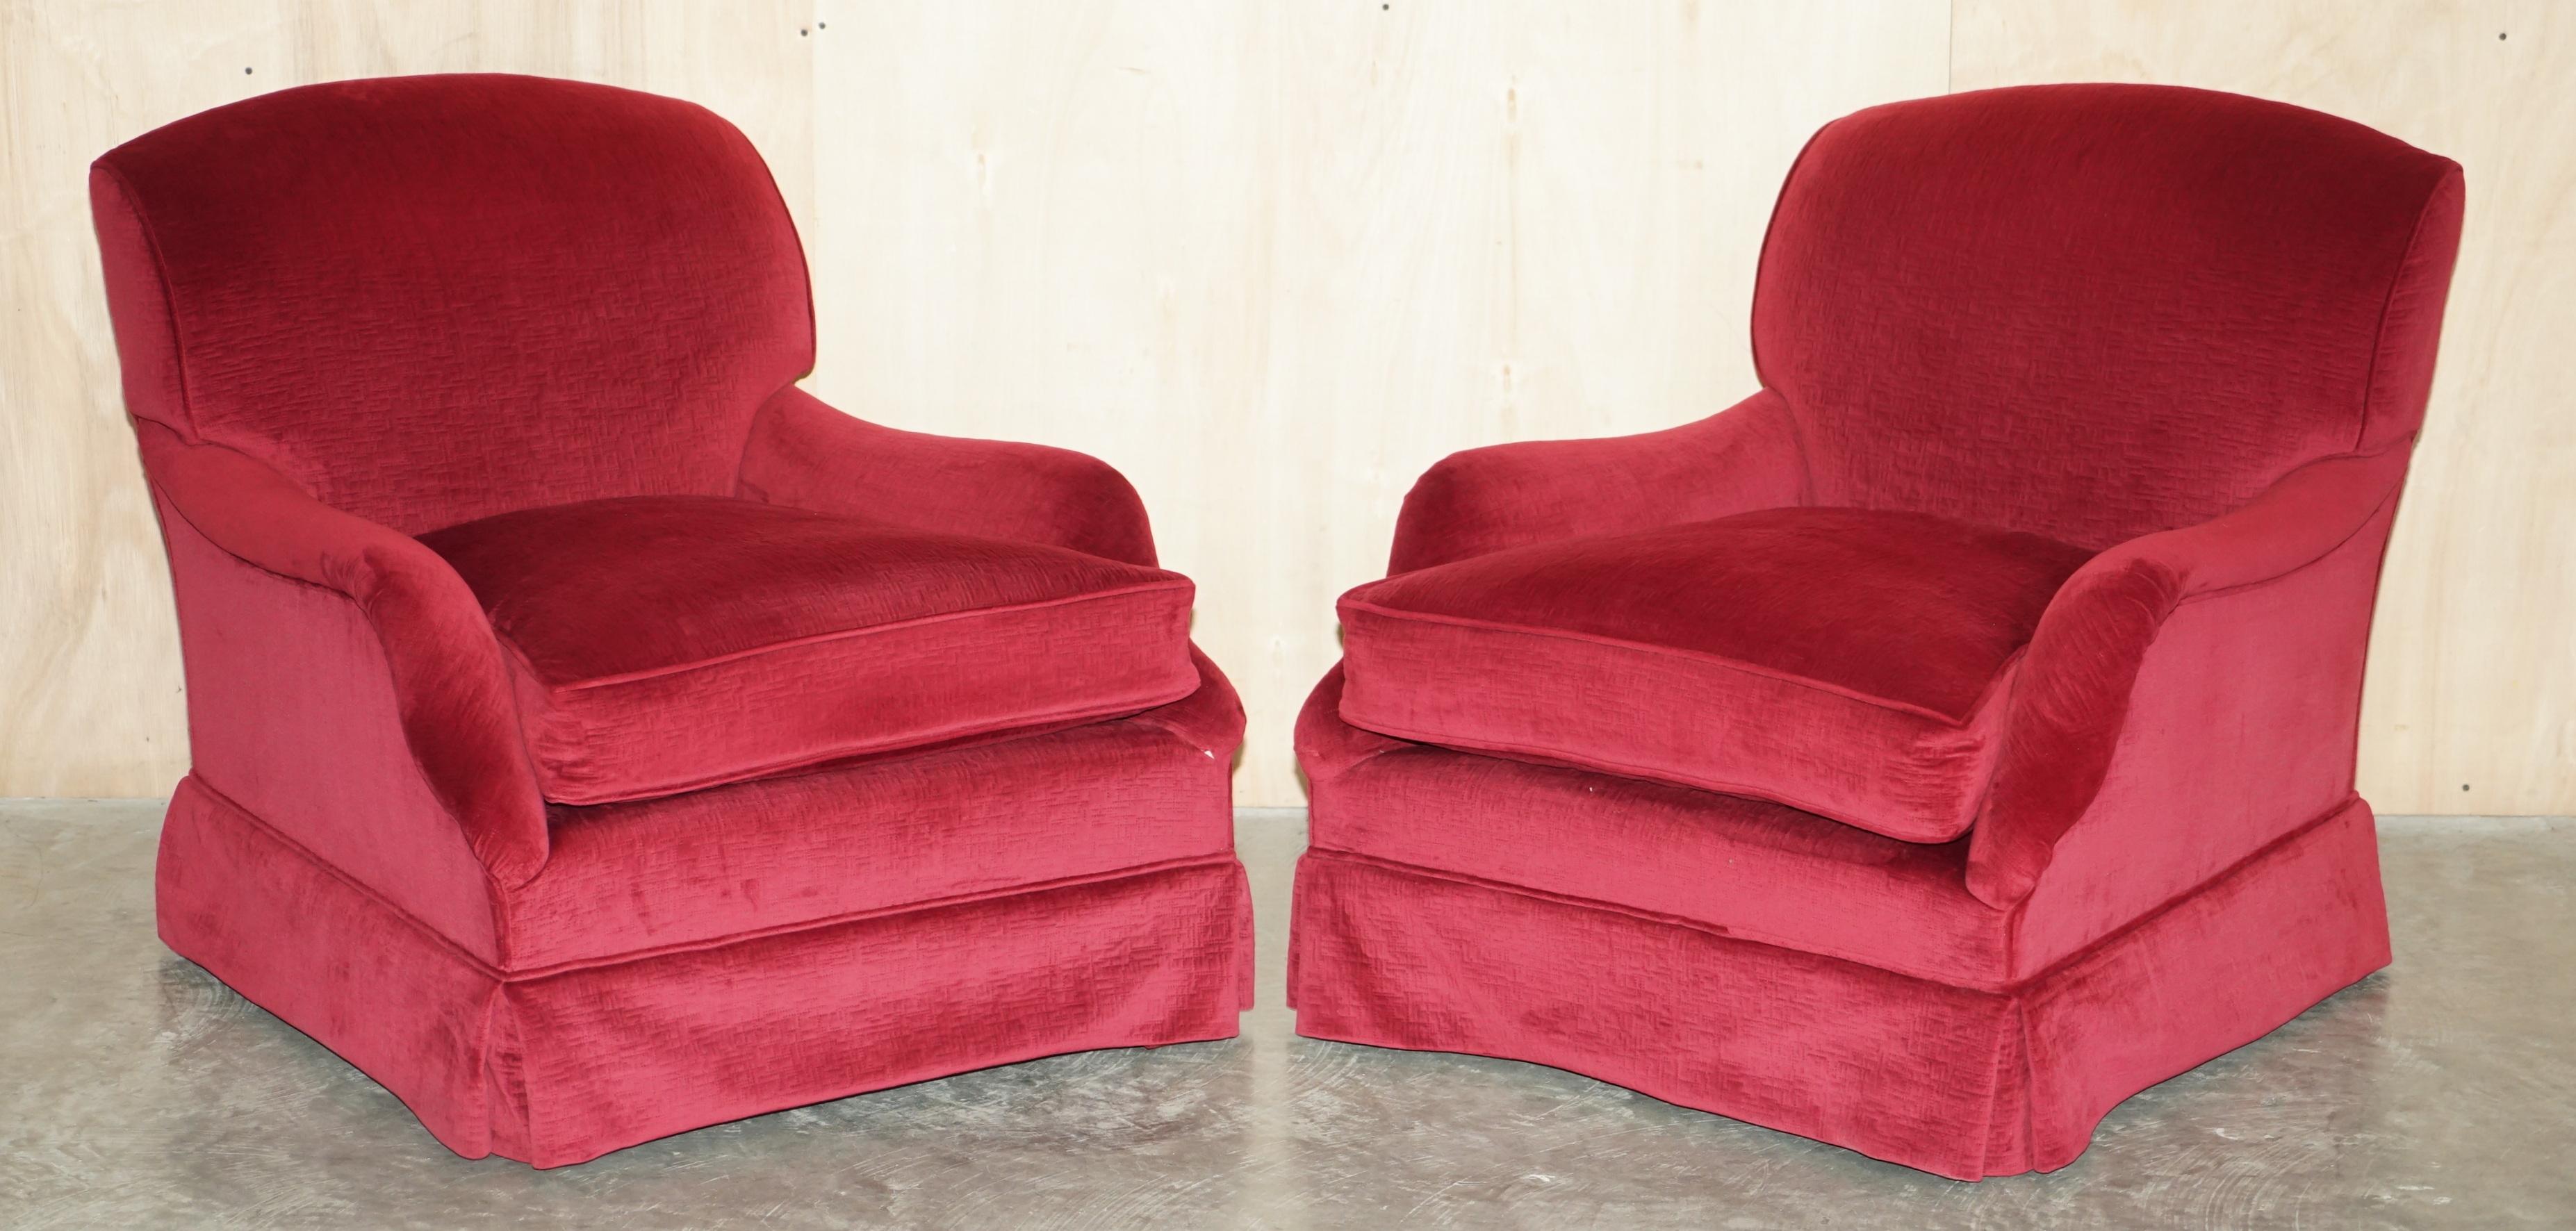 Royal House Antiques

Royal House Antiques is delighted to offer for sale this stunning Howard & Son’s Grafton four seat sofa and matching pair of armchairs upholstered in deep red velvet 

Please note the delivery fee listed is just a guide, it